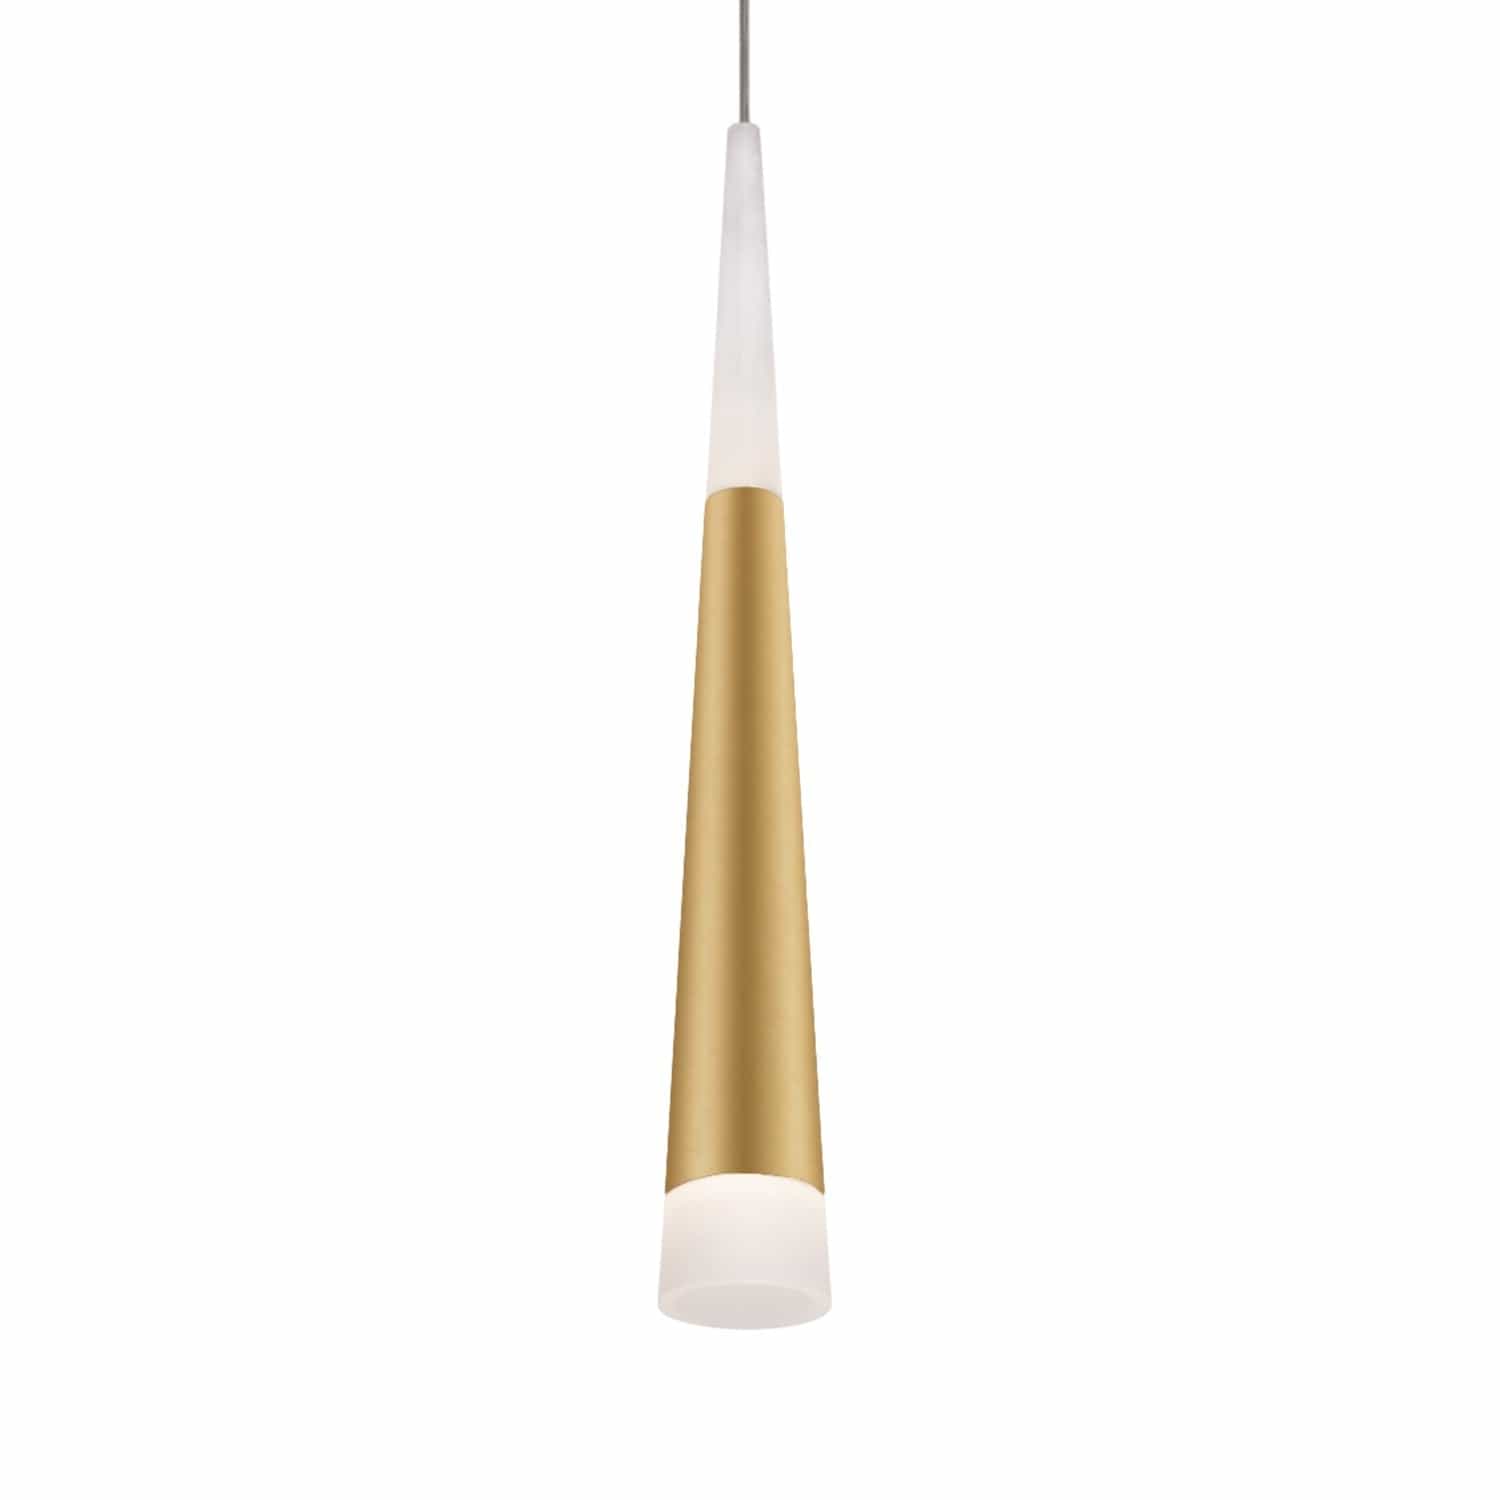 Buy Gold Single Head Cone Tube Pendant Ceiling Light 5W 4000K - A34 | Shop at Supply Master Accra, Ghana Lamps & Lightings Buy Tools hardware Building materials